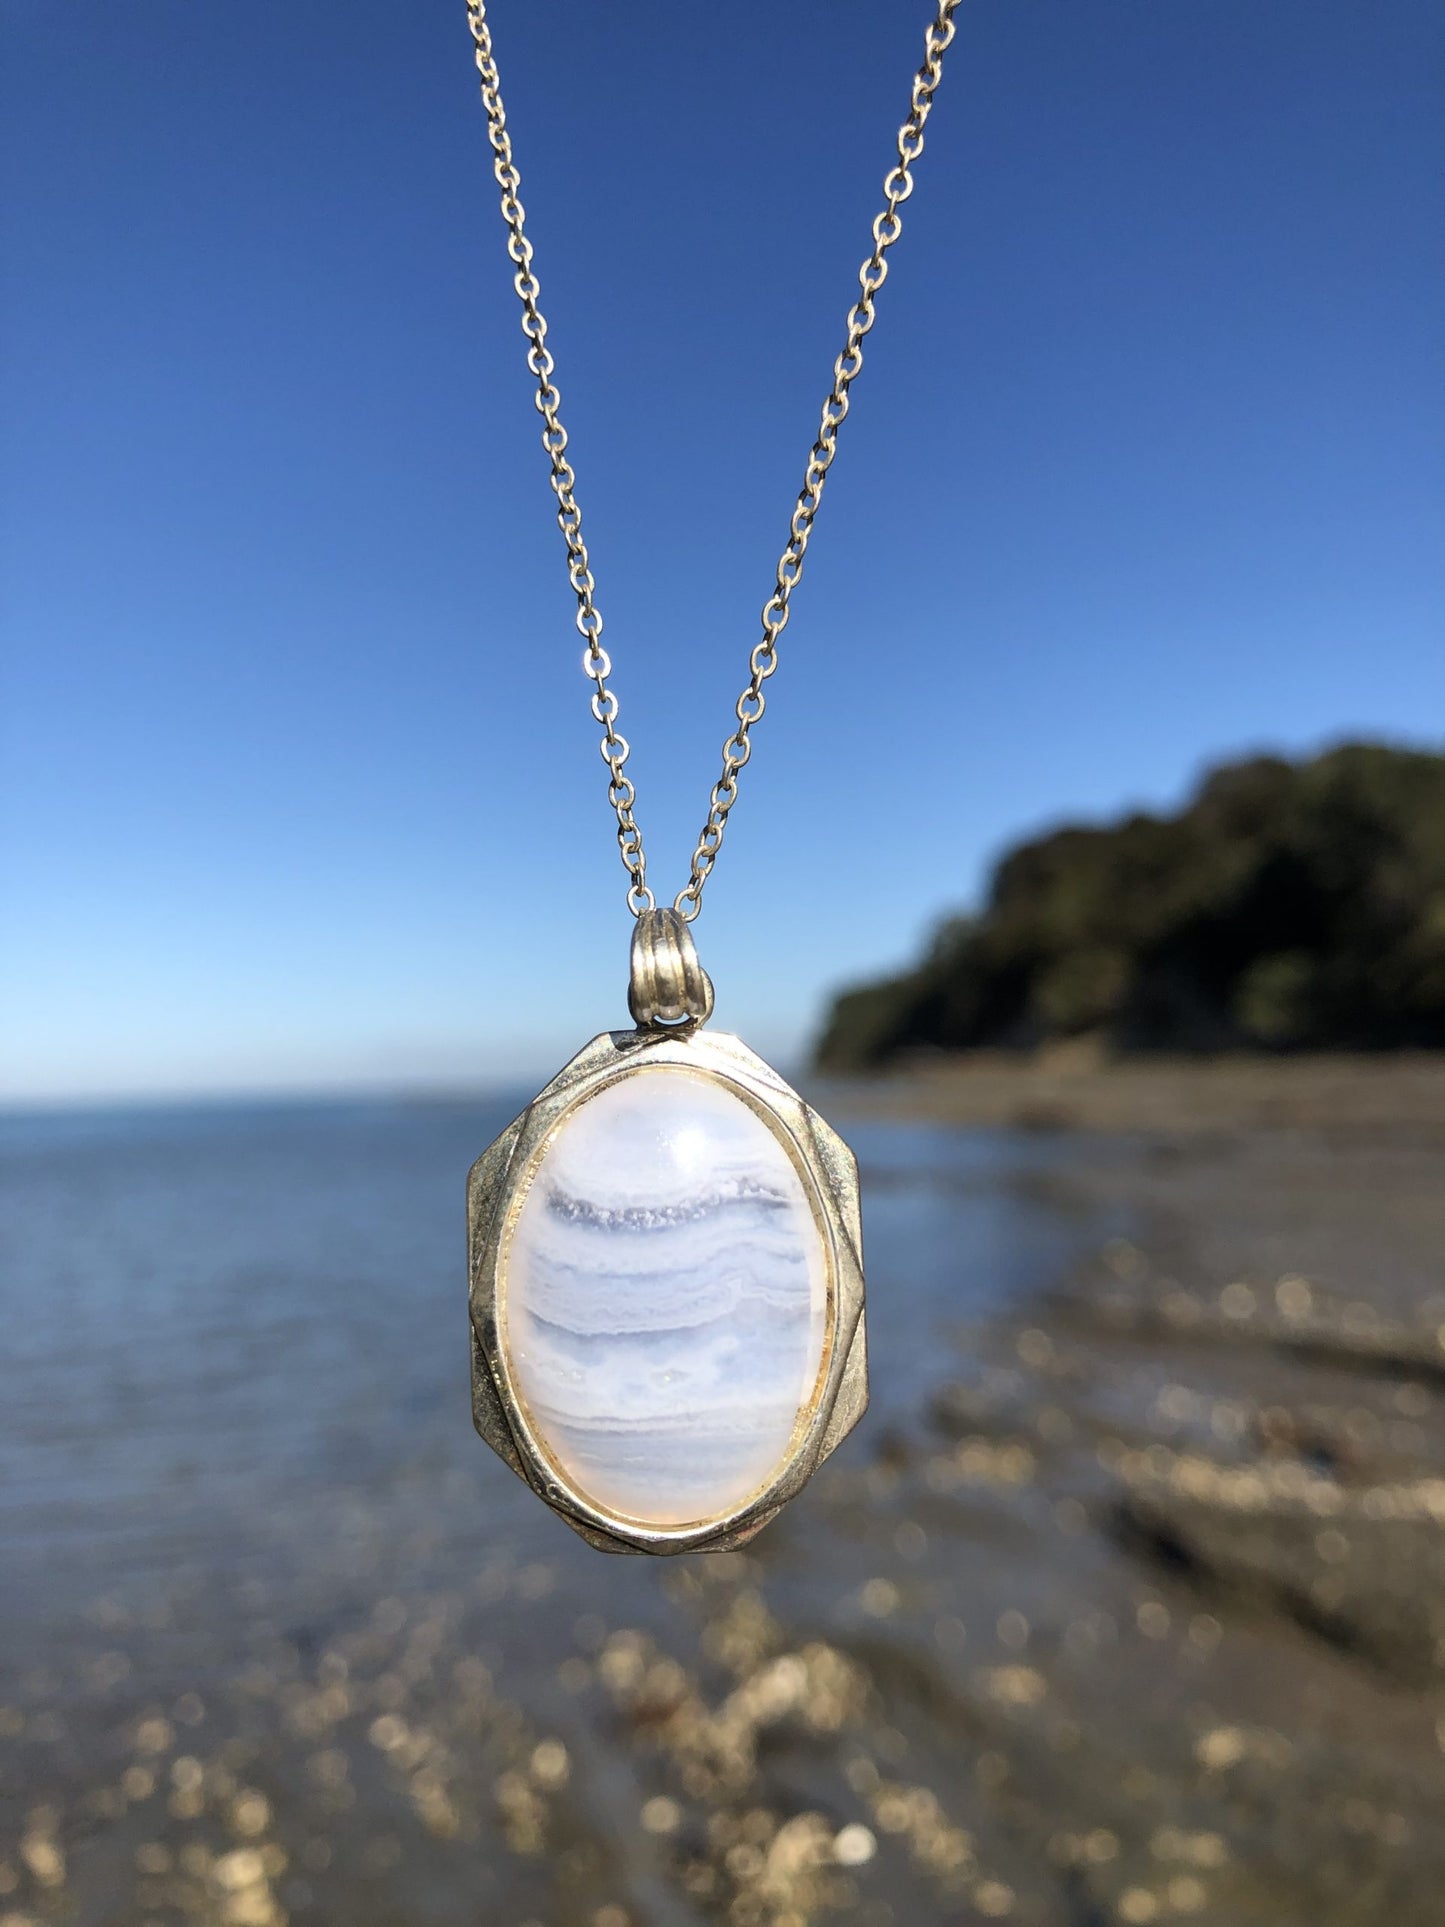 Necklace of Namibian Blue Lace Agate, with delicate blue and white stripes, hand polished to a 25x18mm cabochon and set in silver plated setting with 19 inch chain, on beach